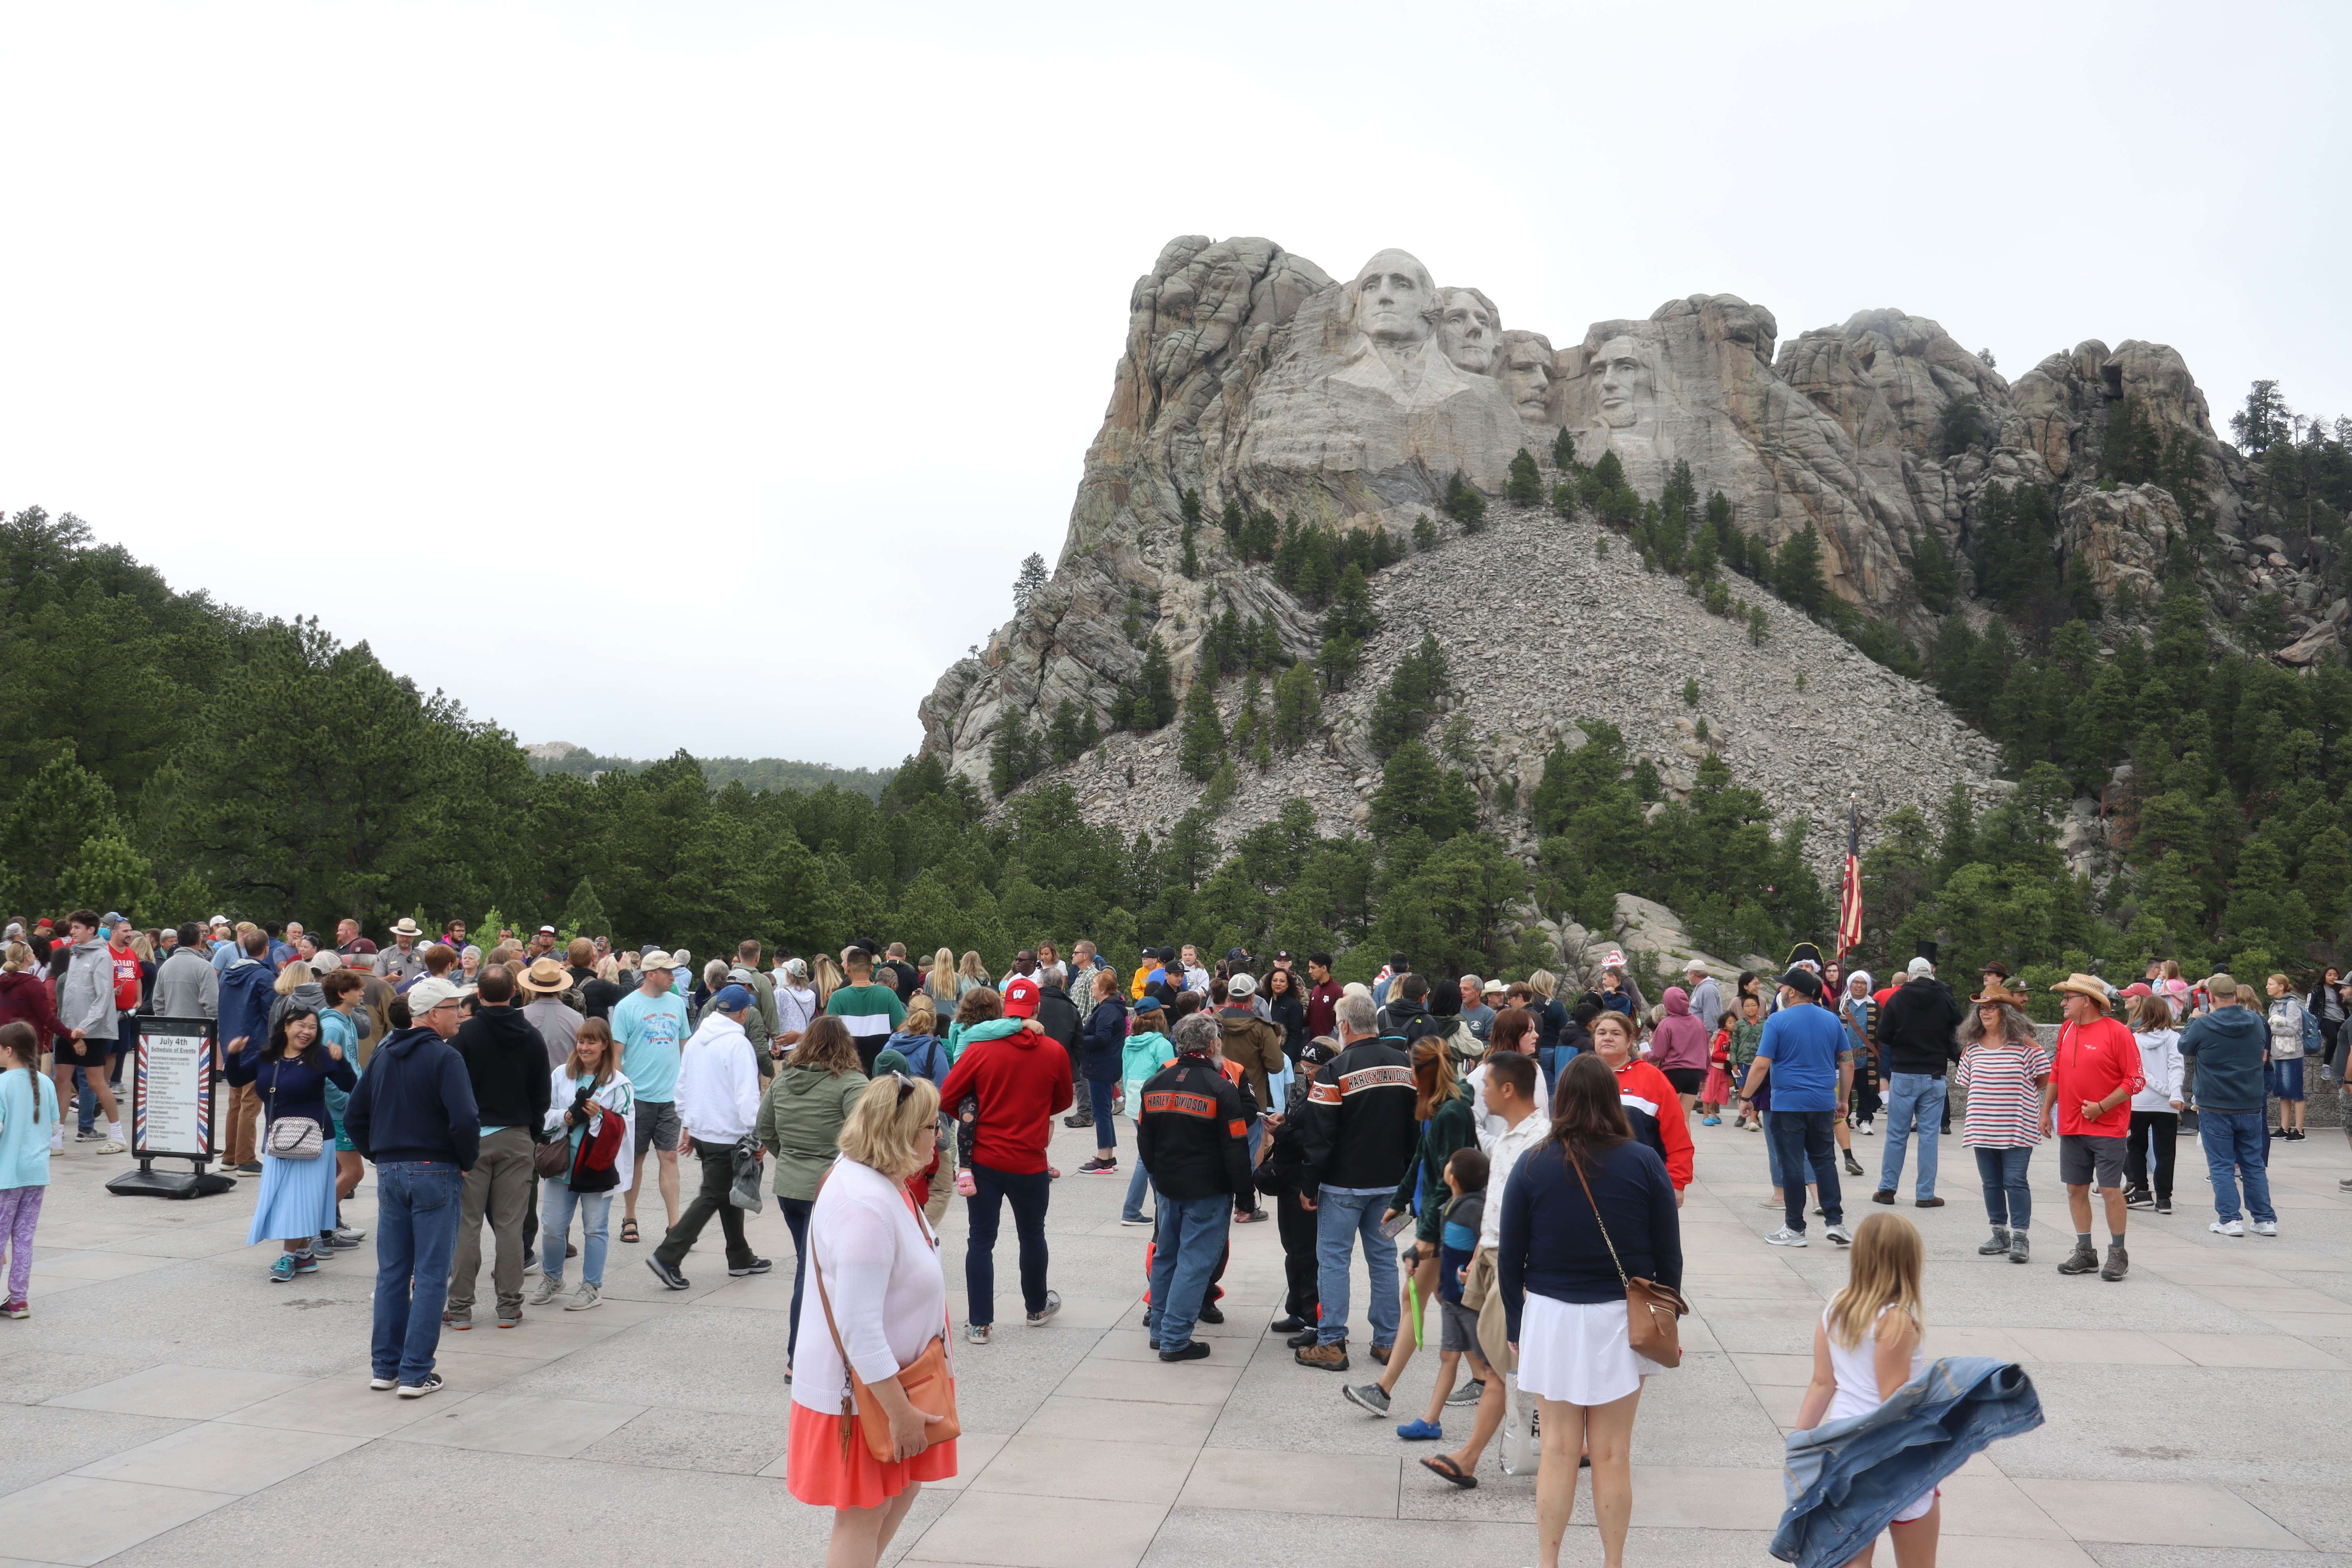 dozens of people standing in front of Mount Rushmore under a overcast sky.